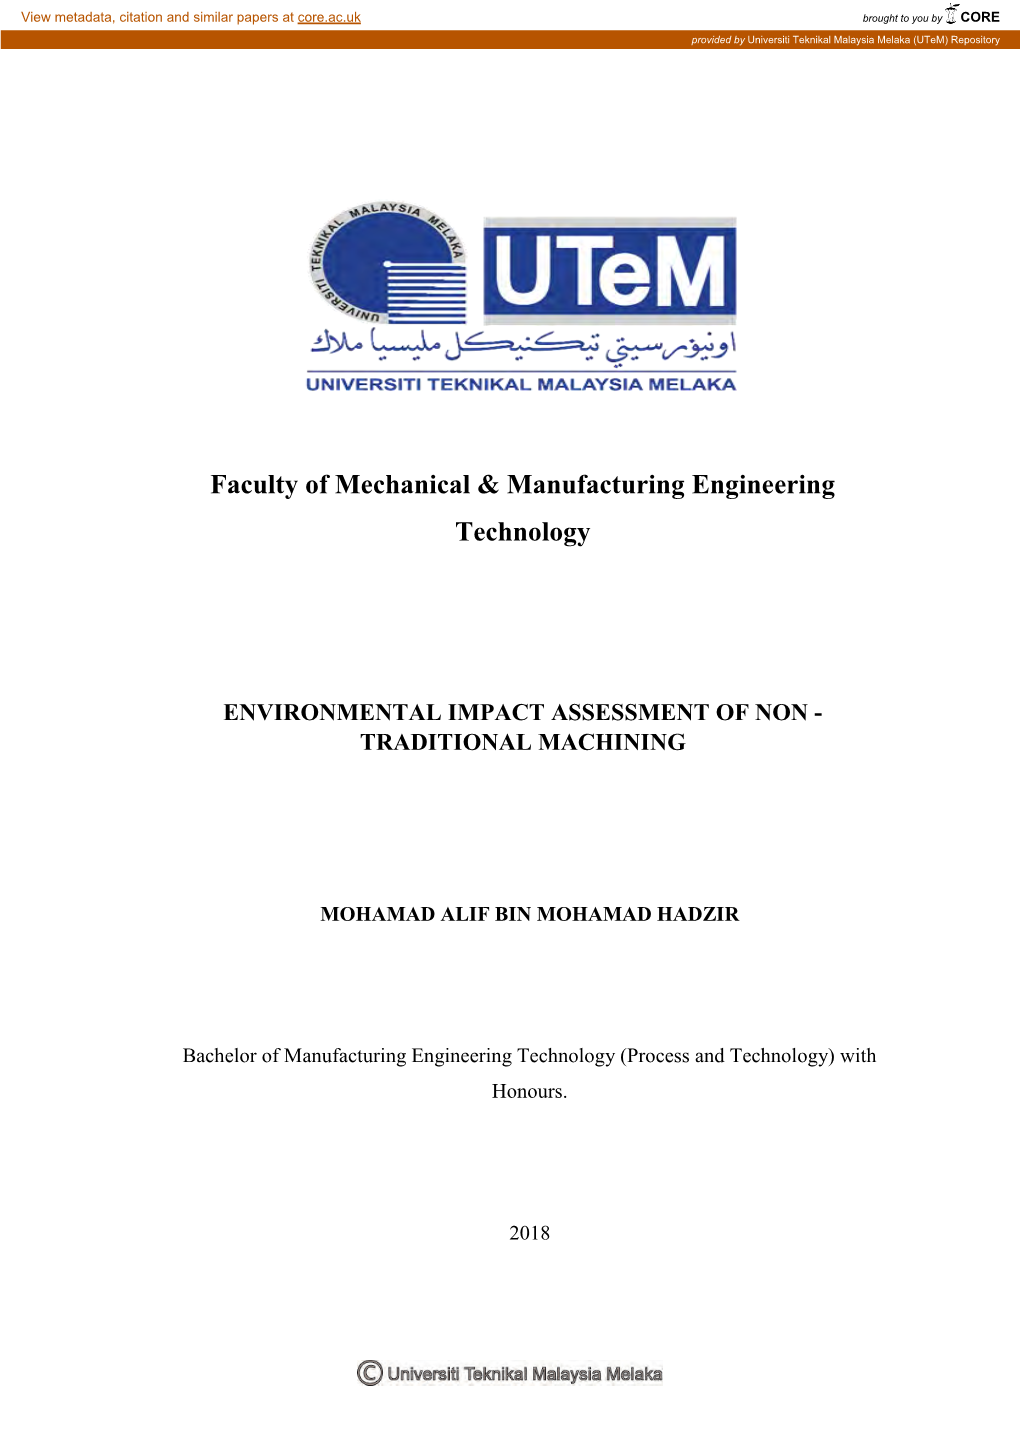 Faculty of Mechanical & Manufacturing Engineering Technology